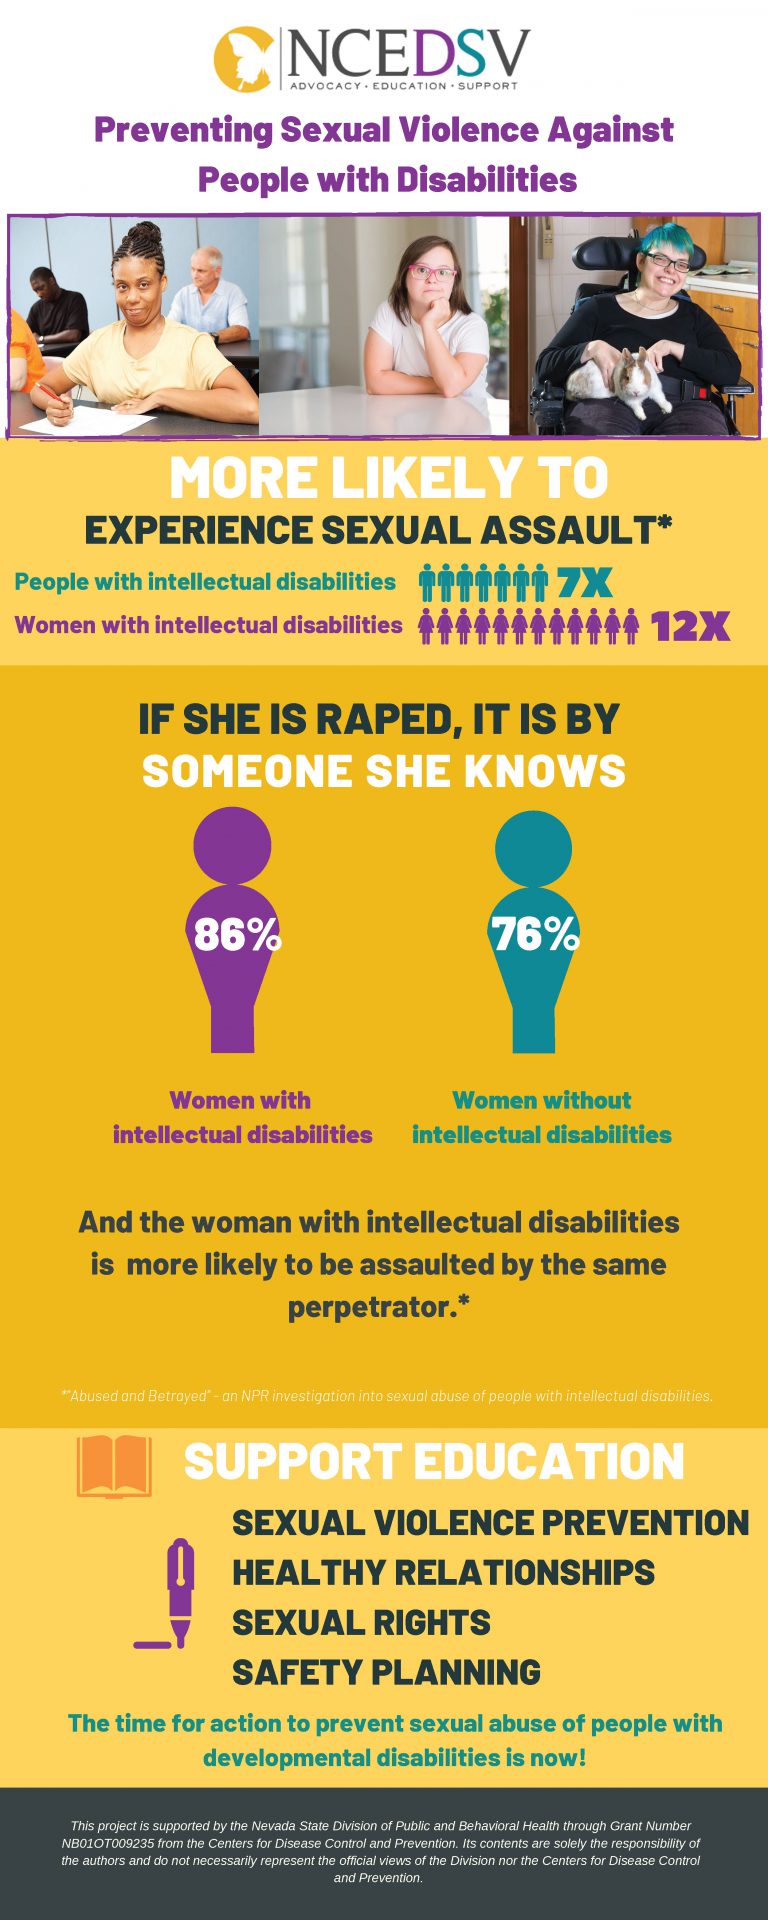 Preventing Sexual Violence Against People with Disabilities